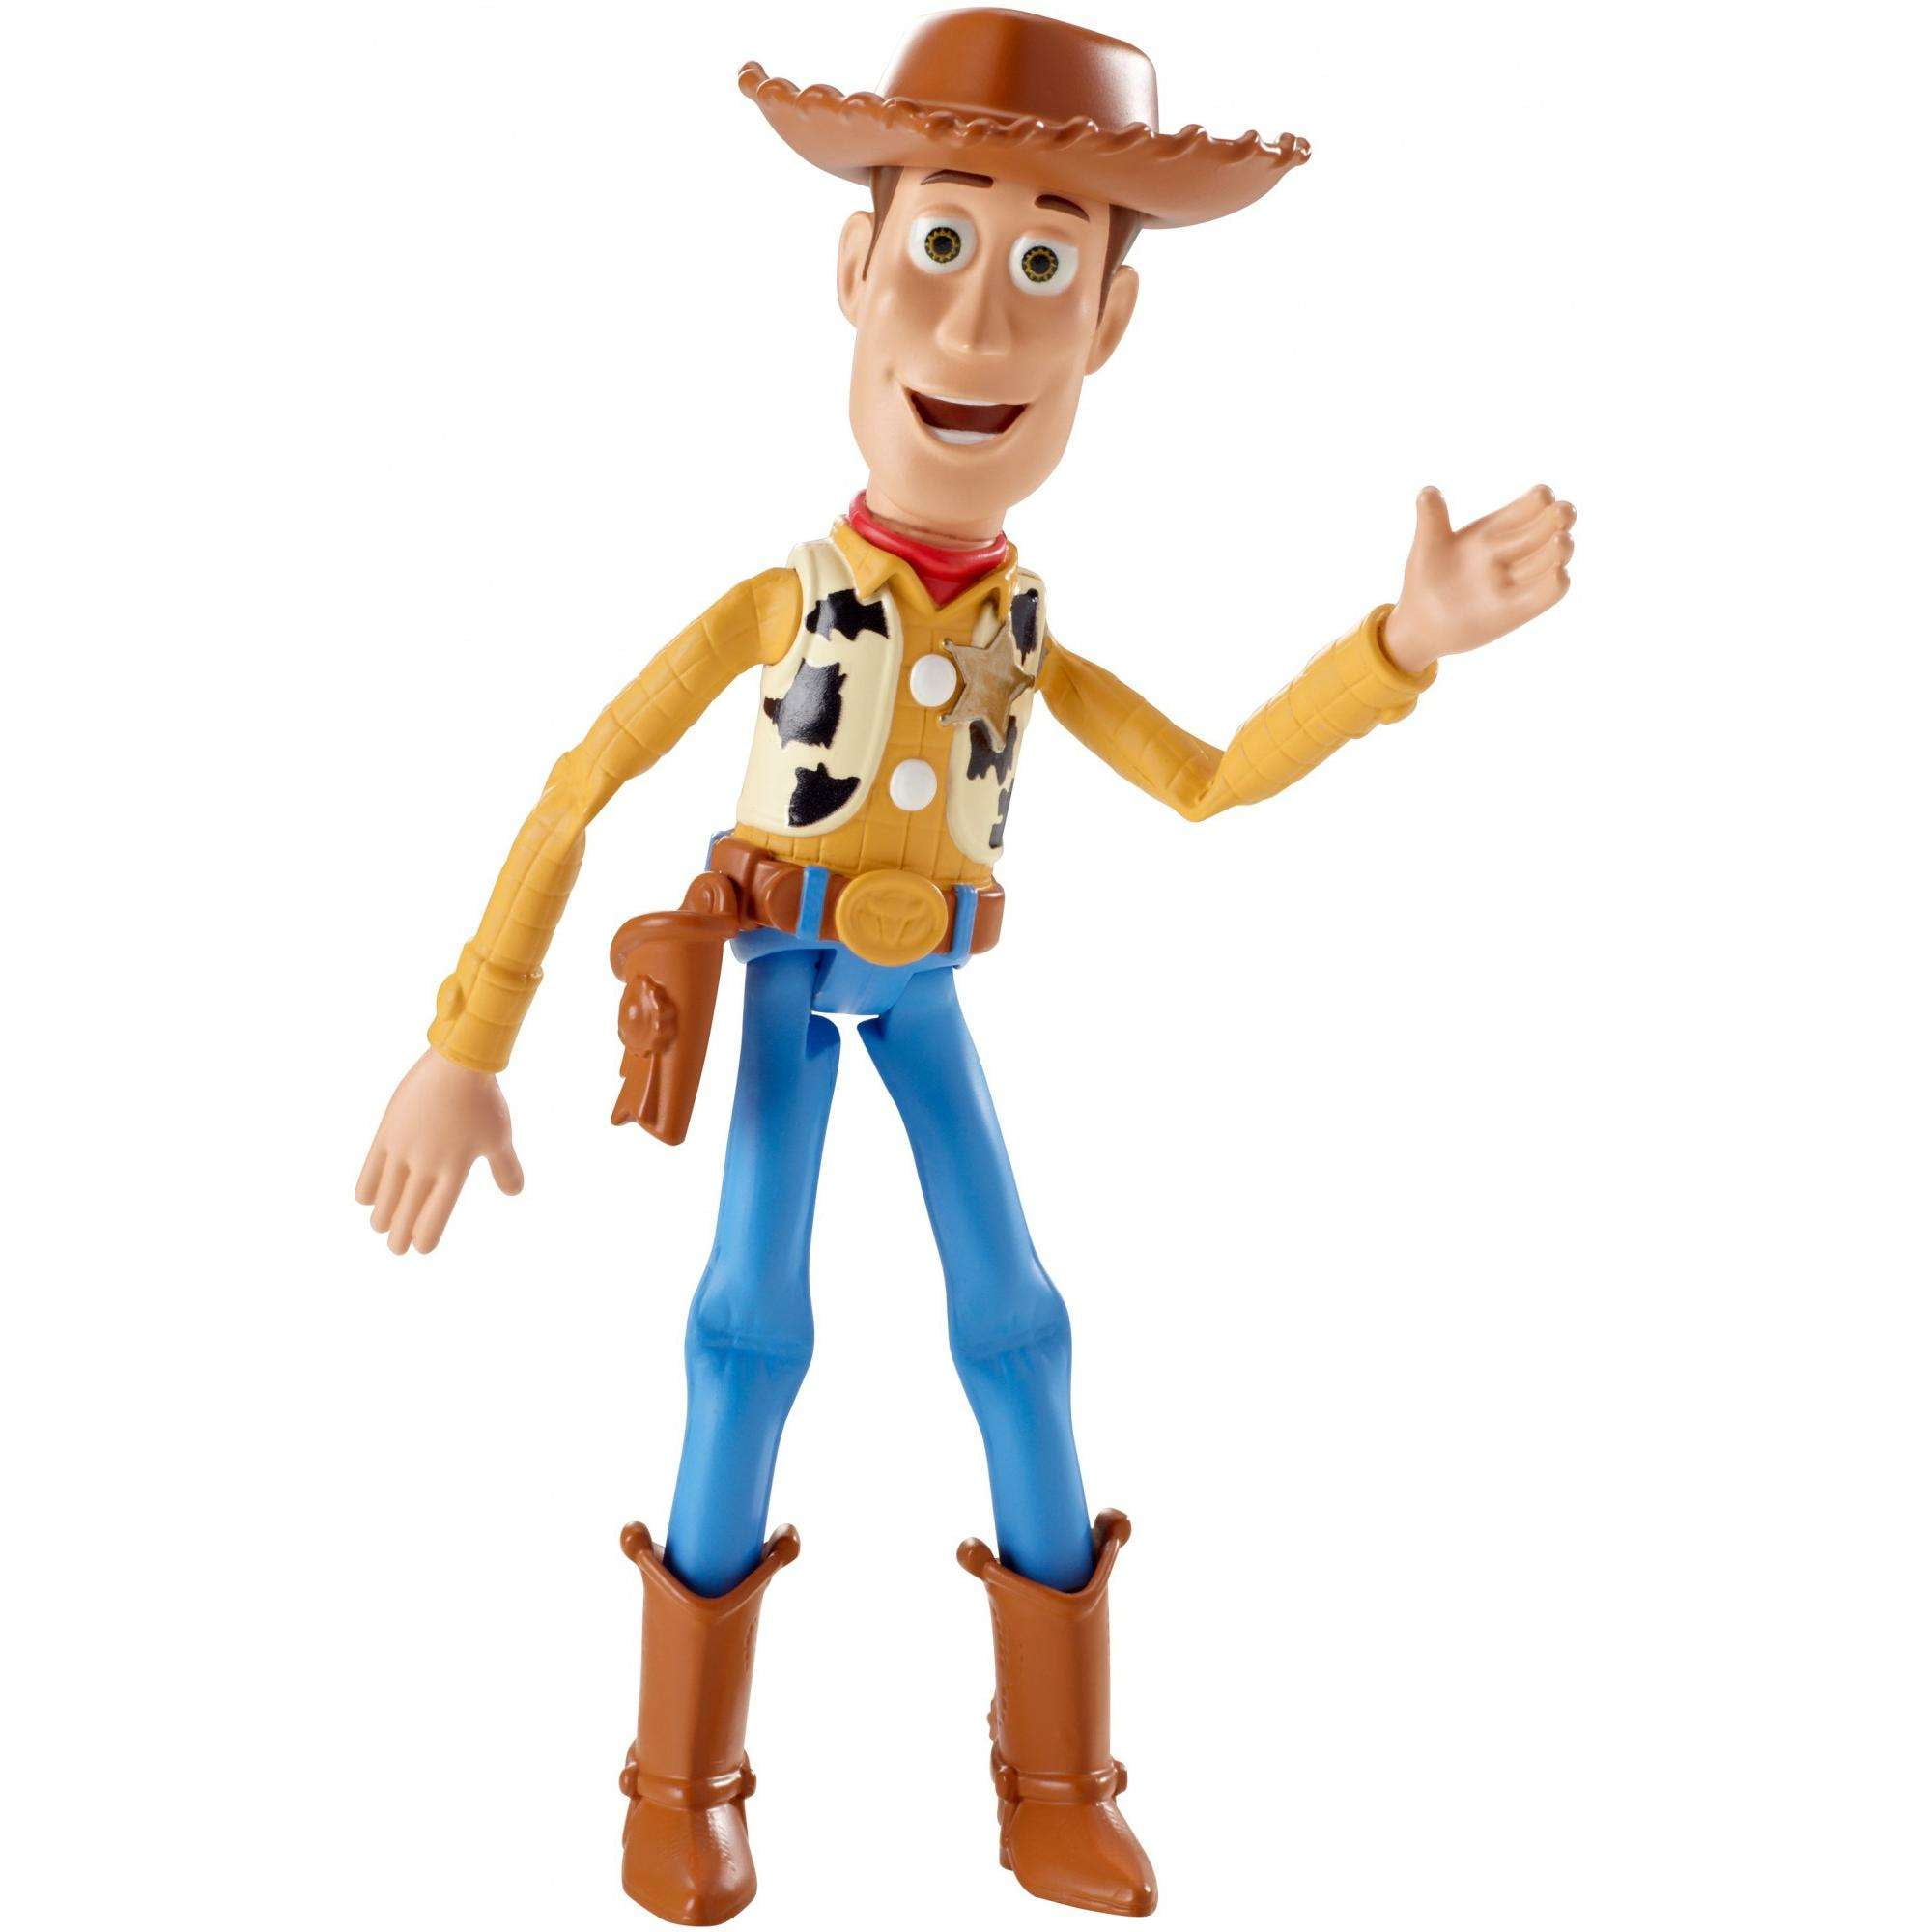 Disneypixar Toy Story Figure 4 Inch Posable Woody The Sheriff